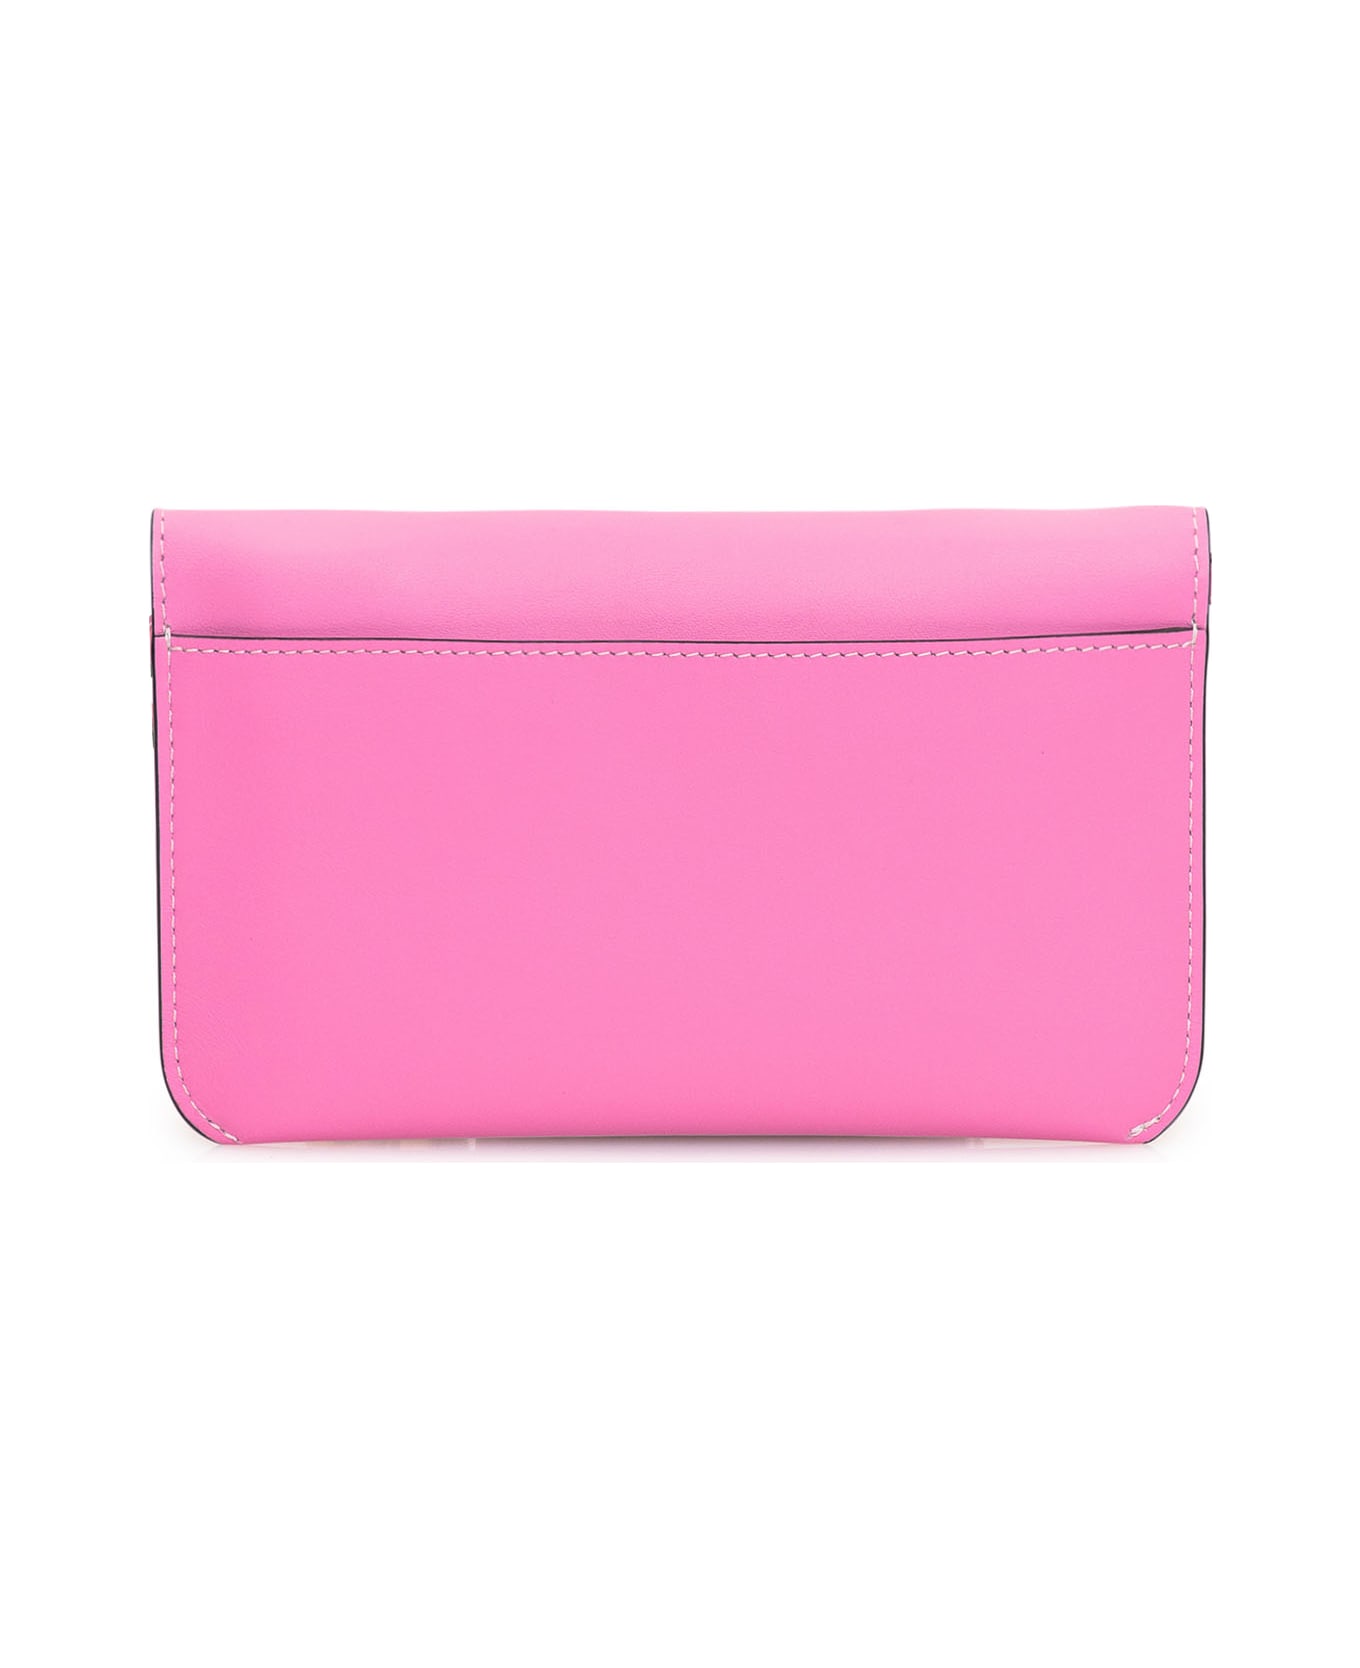 J.W. Anderson Chain Phone Clutch Bag - PINK クラッチバッグ